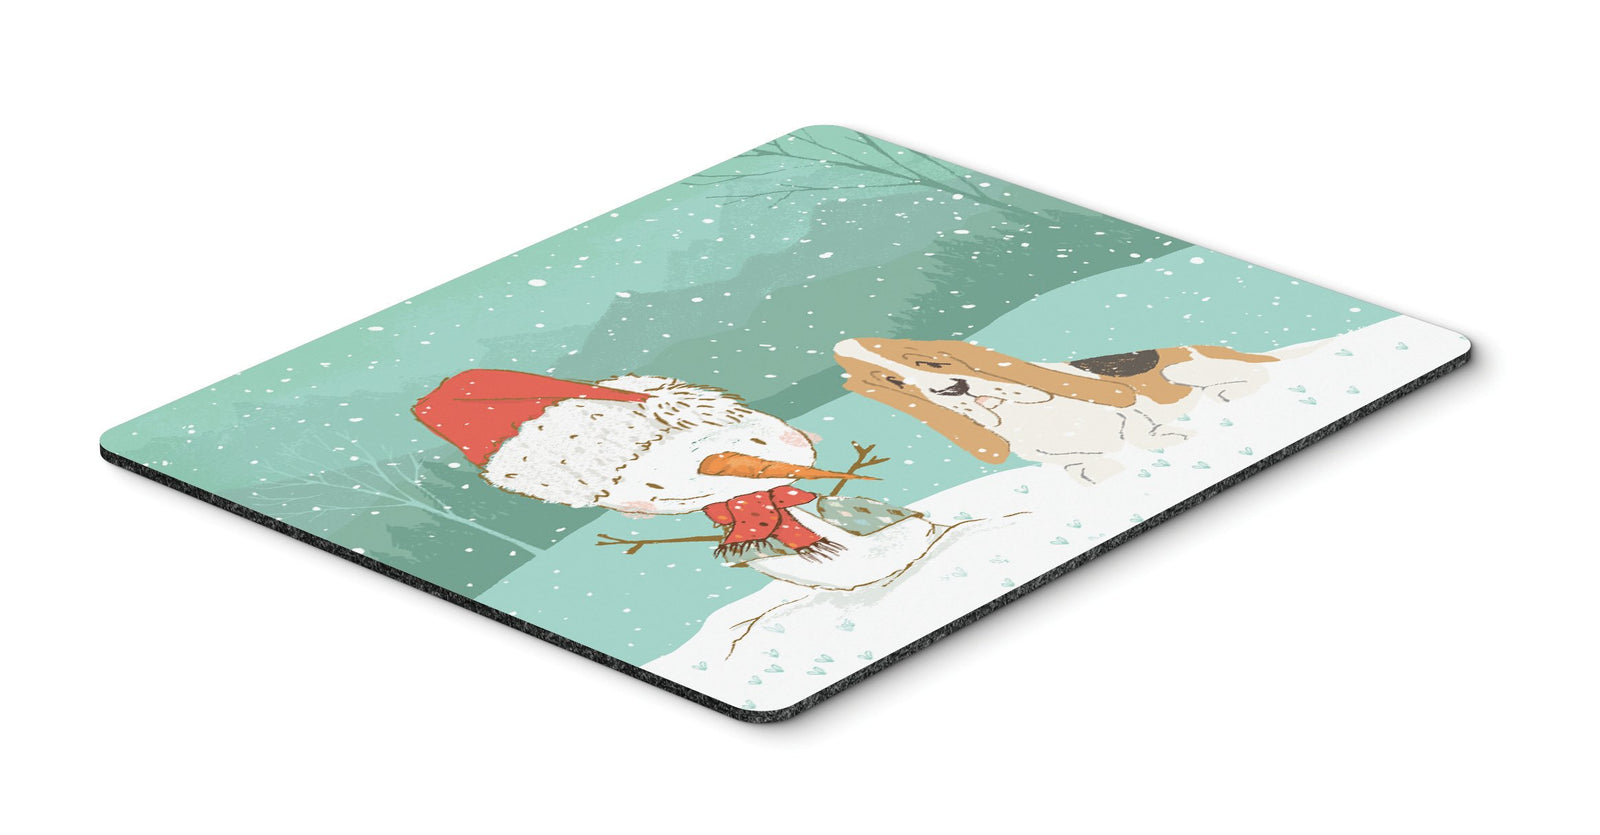 Basset Hound Snowman Christmas Mouse Pad, Hot Pad or Trivet CK2051MP by Caroline's Treasures